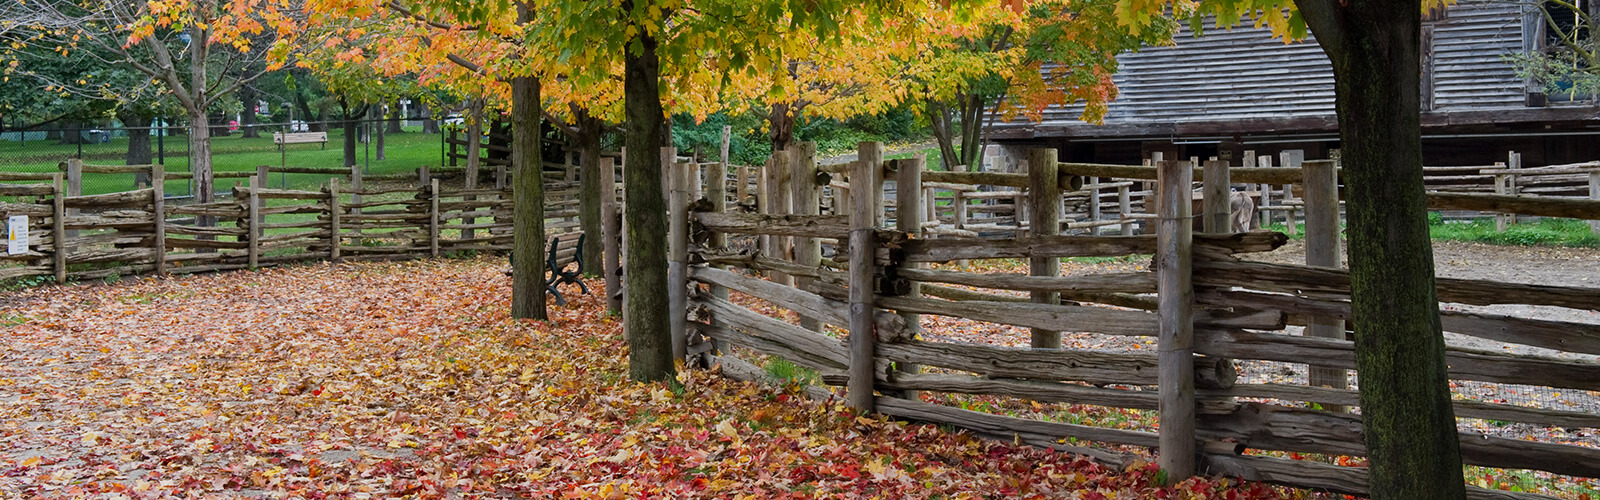 Wooden fences surround animal enclosures at Riverdale Farm. The ground is covered in colourful fall leaves that have fallen from the surrounding trees.